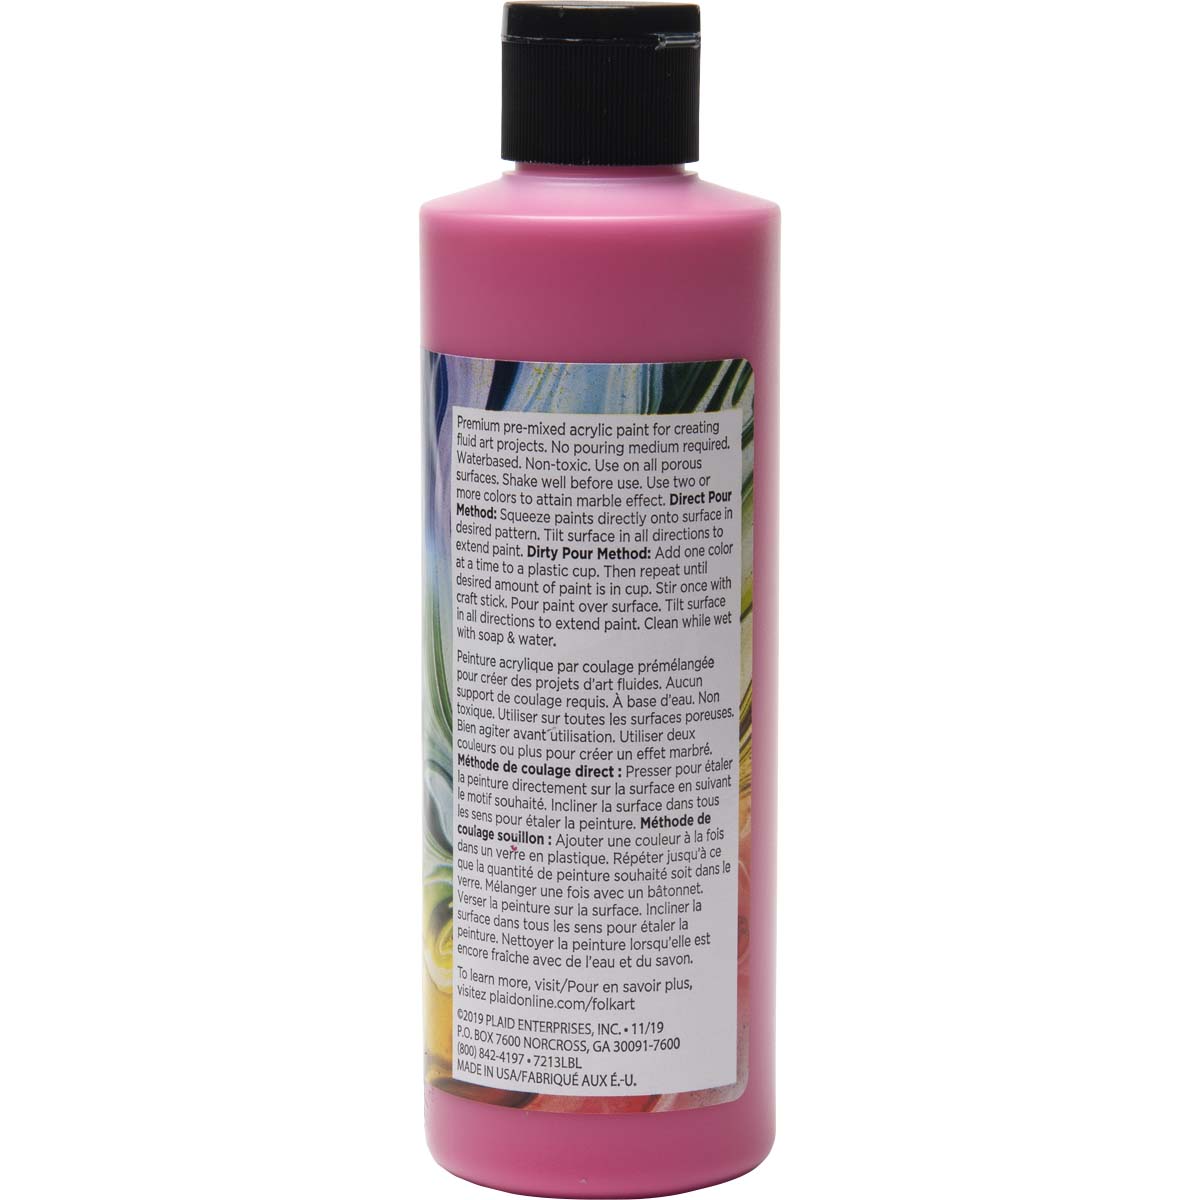 FolkArt ® Pre-mixed Pouring Paint - Bright Pink, 8 oz. - 7213